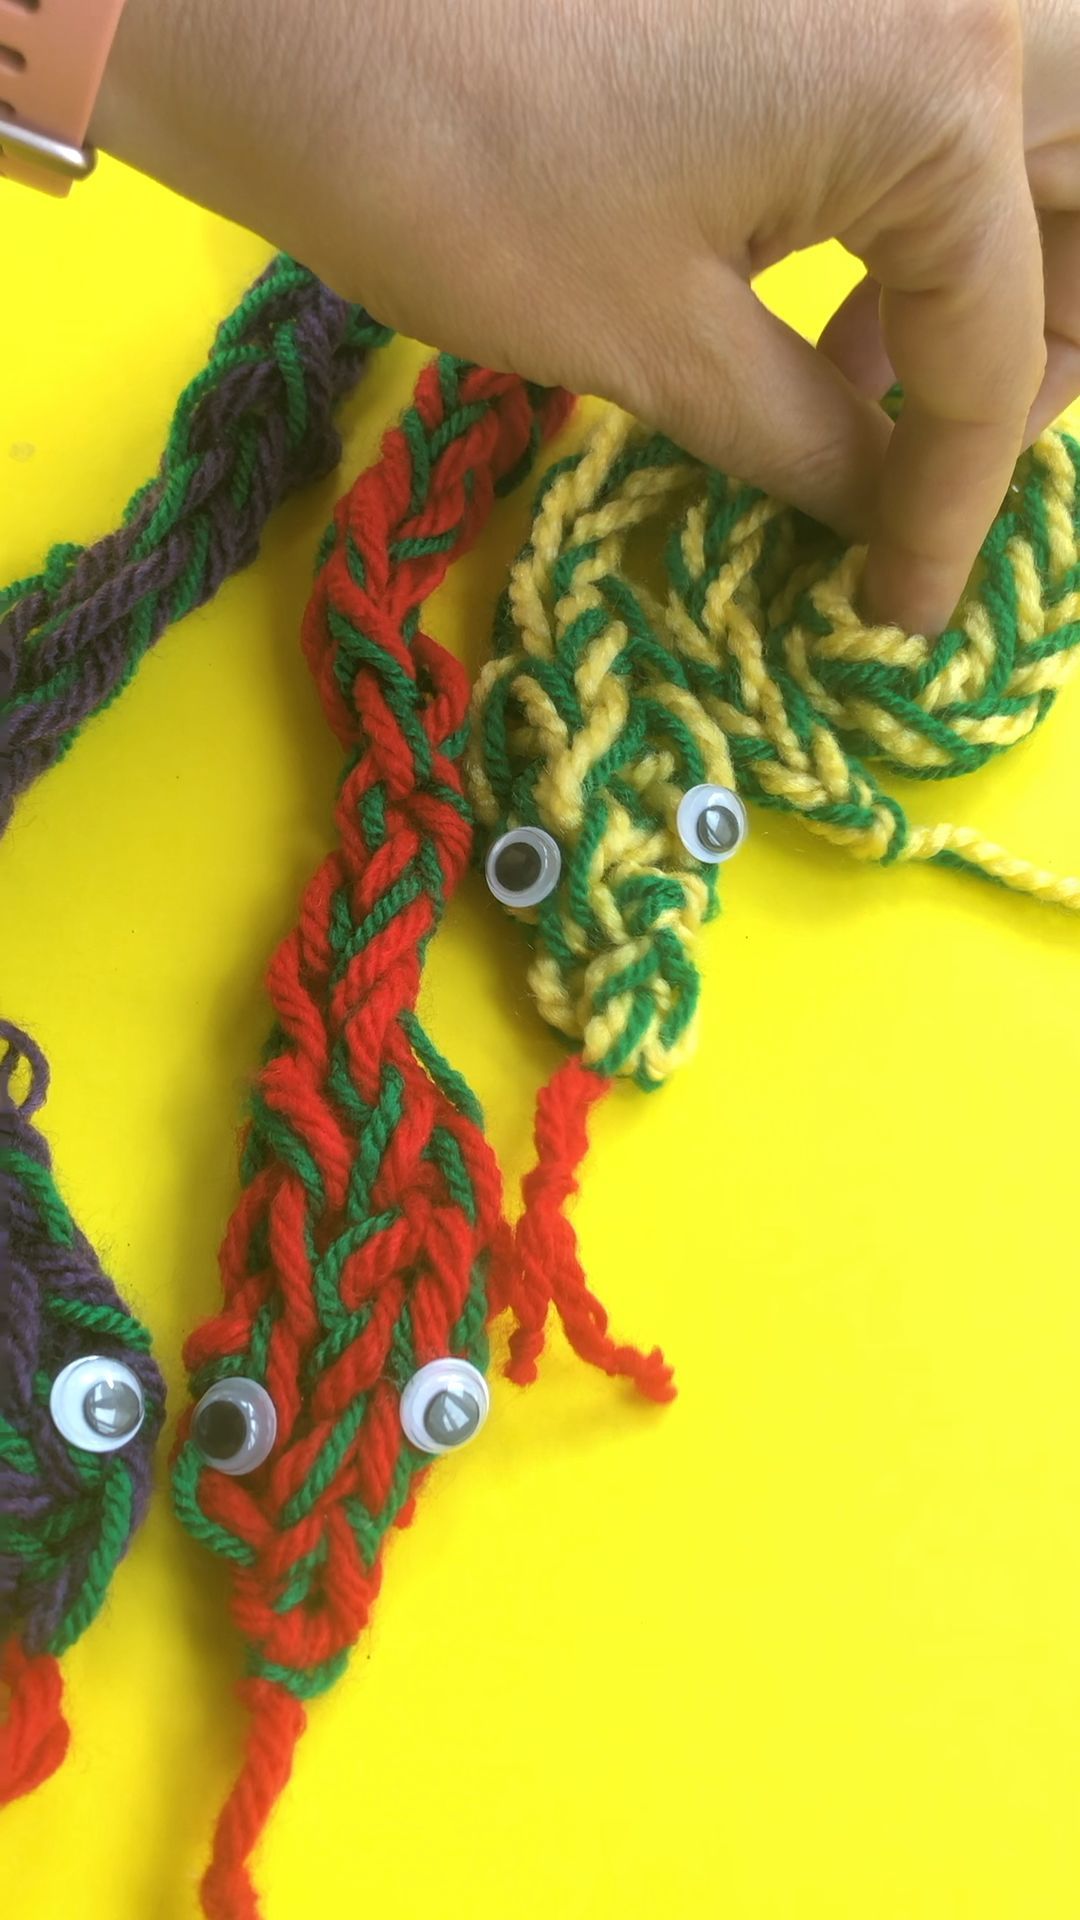 Finger Knitting Snakes - Red Ted Art -   18 fabric crafts For Kids to make ideas